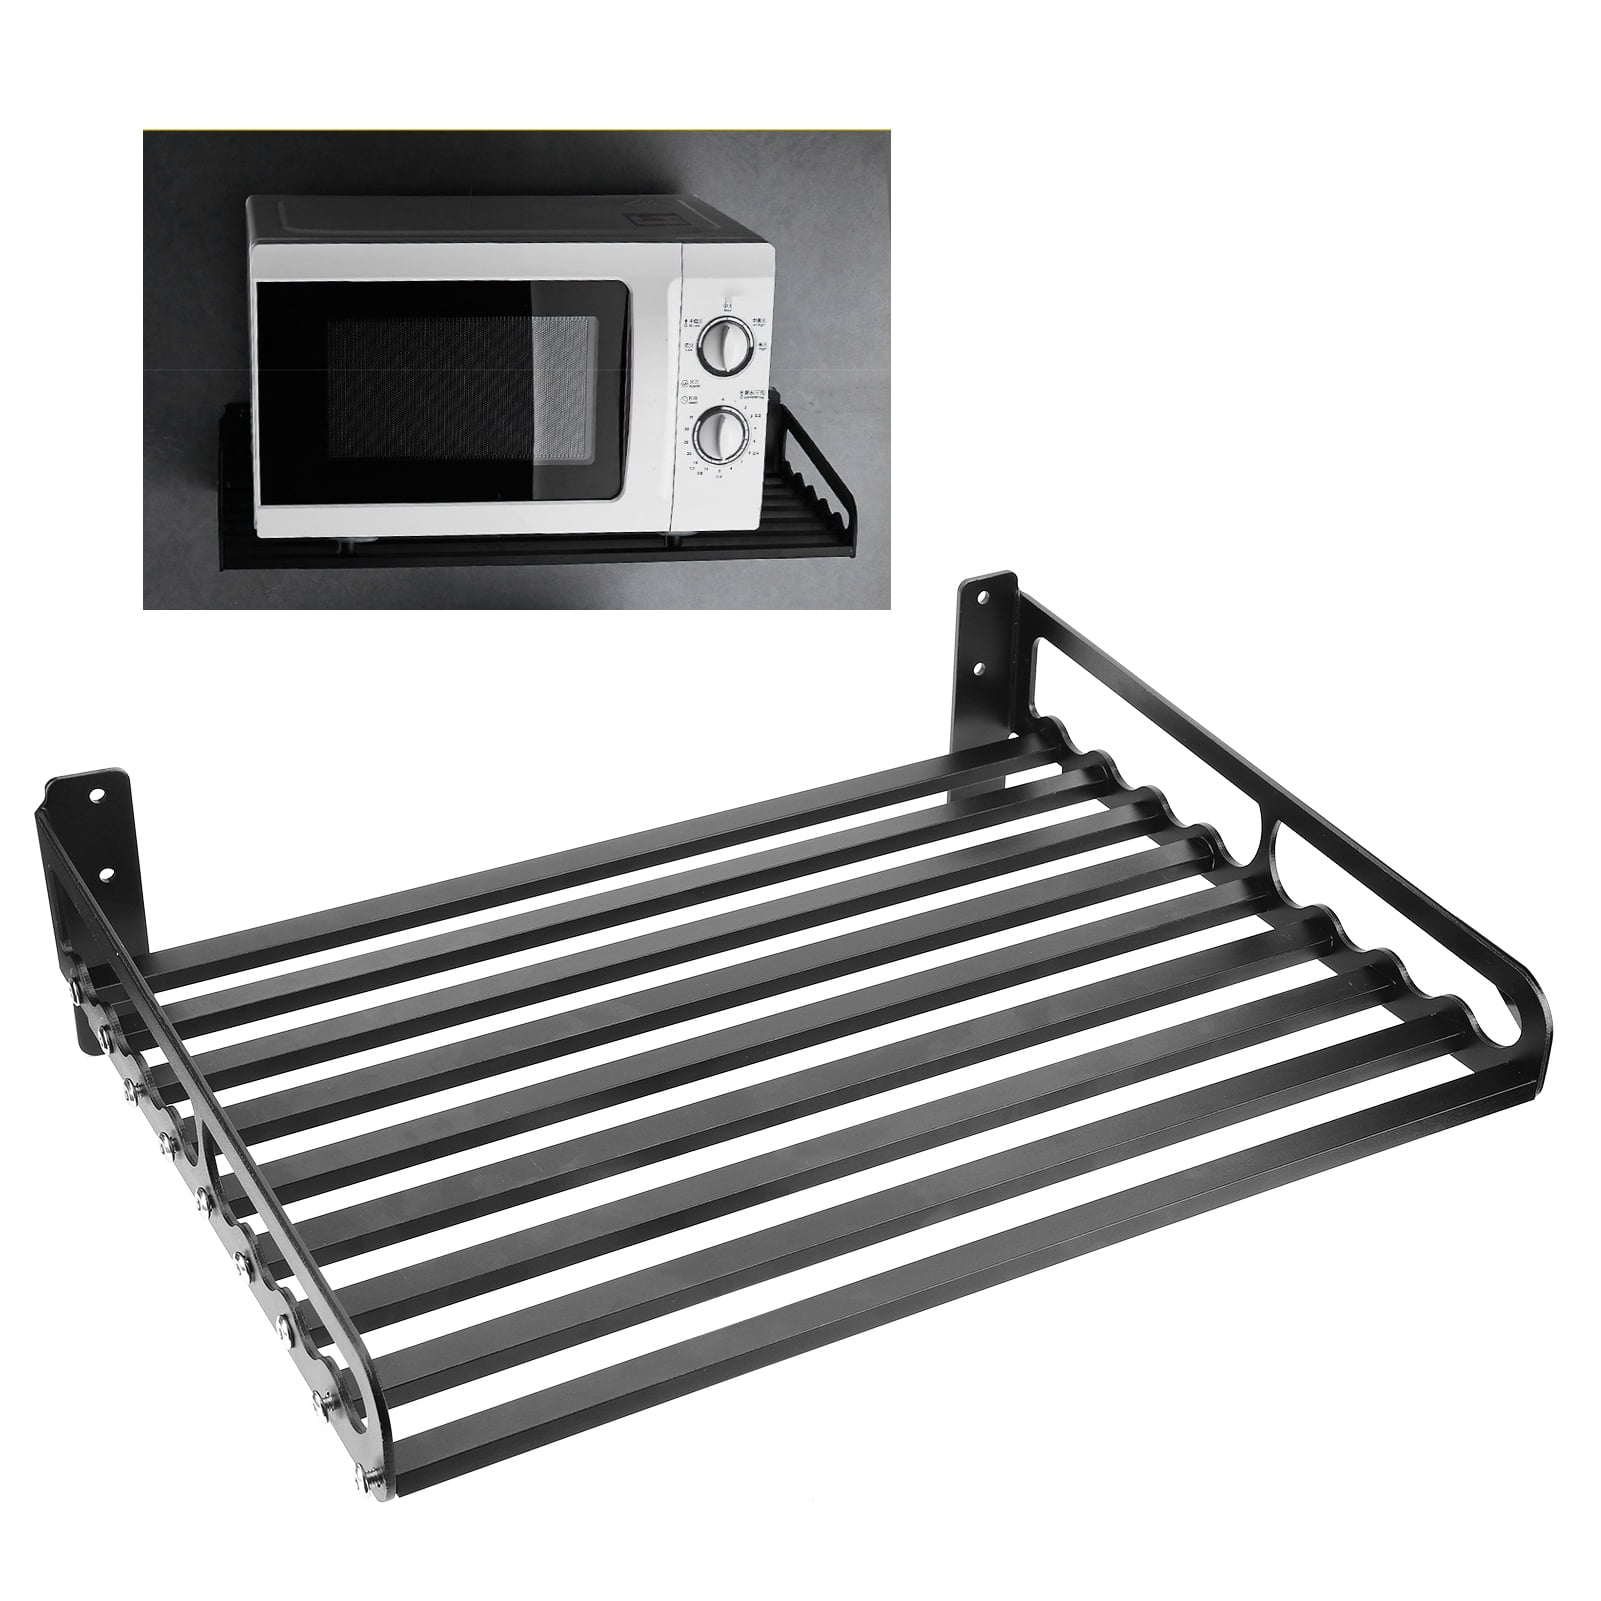 Alumimum Microwave Oven Wall Mount Shelf With Removable  USA 